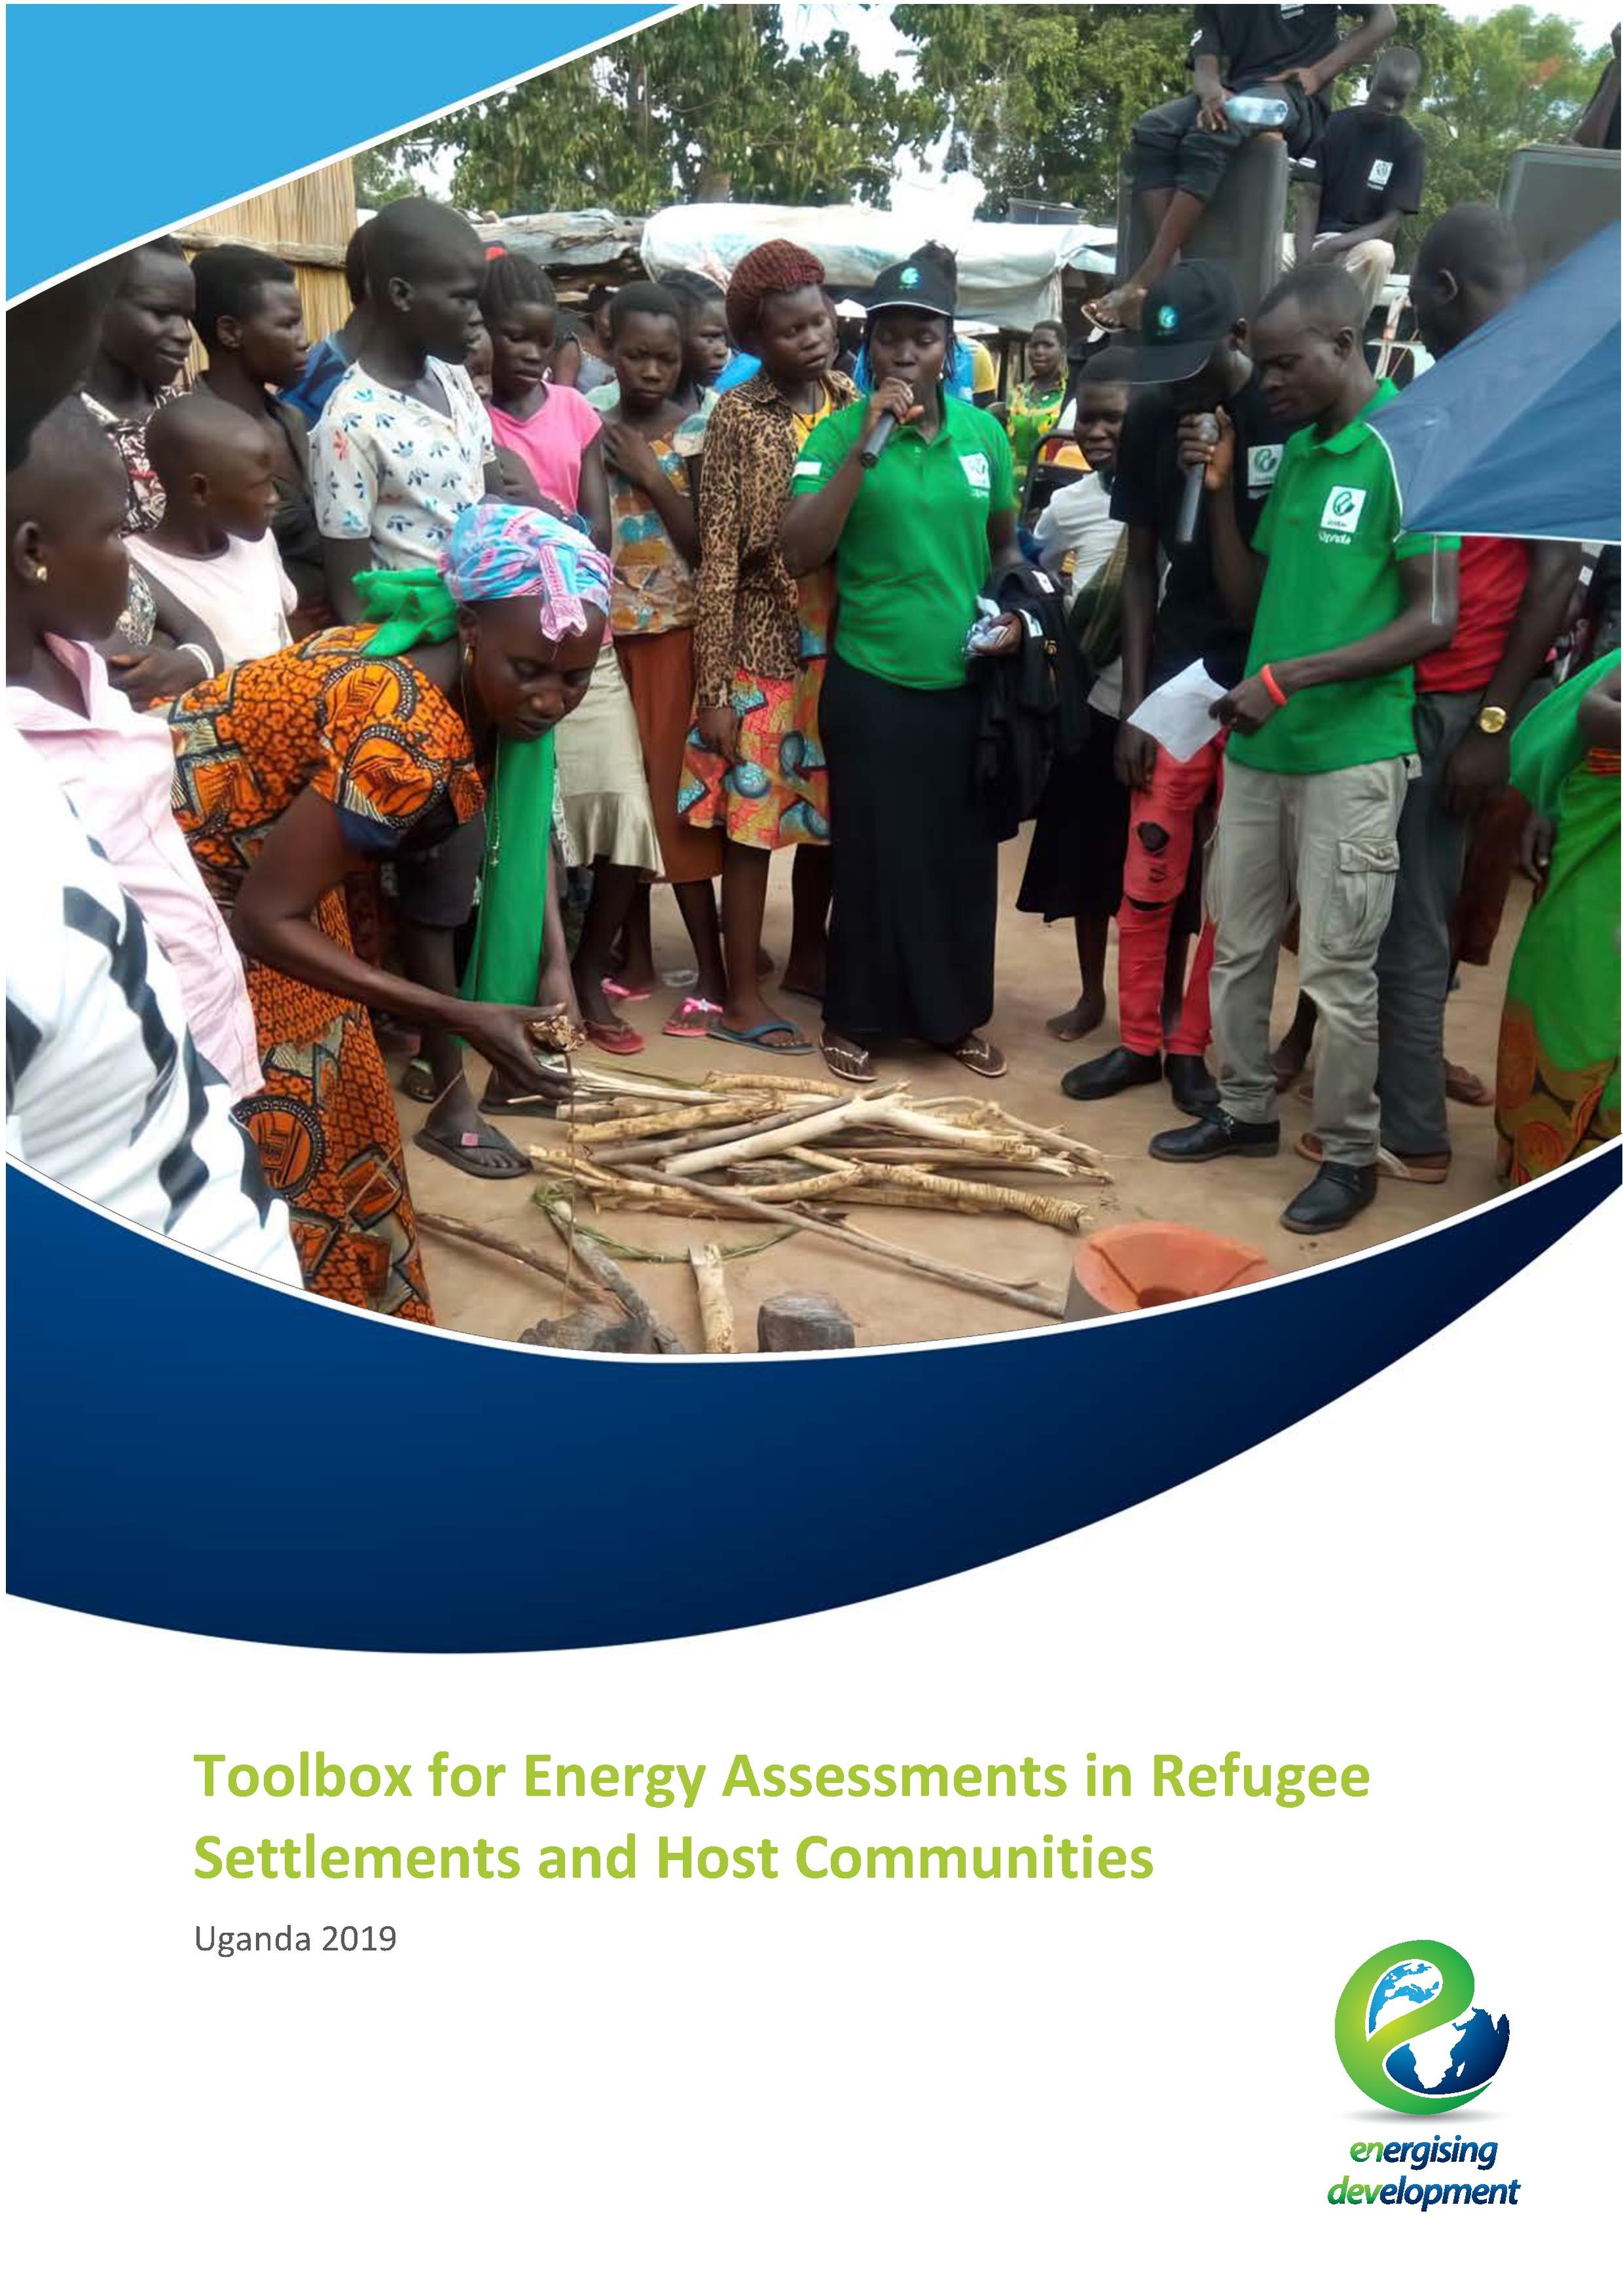 Toolbox for Energy Assessments in Refugee Settlements and Host Communities